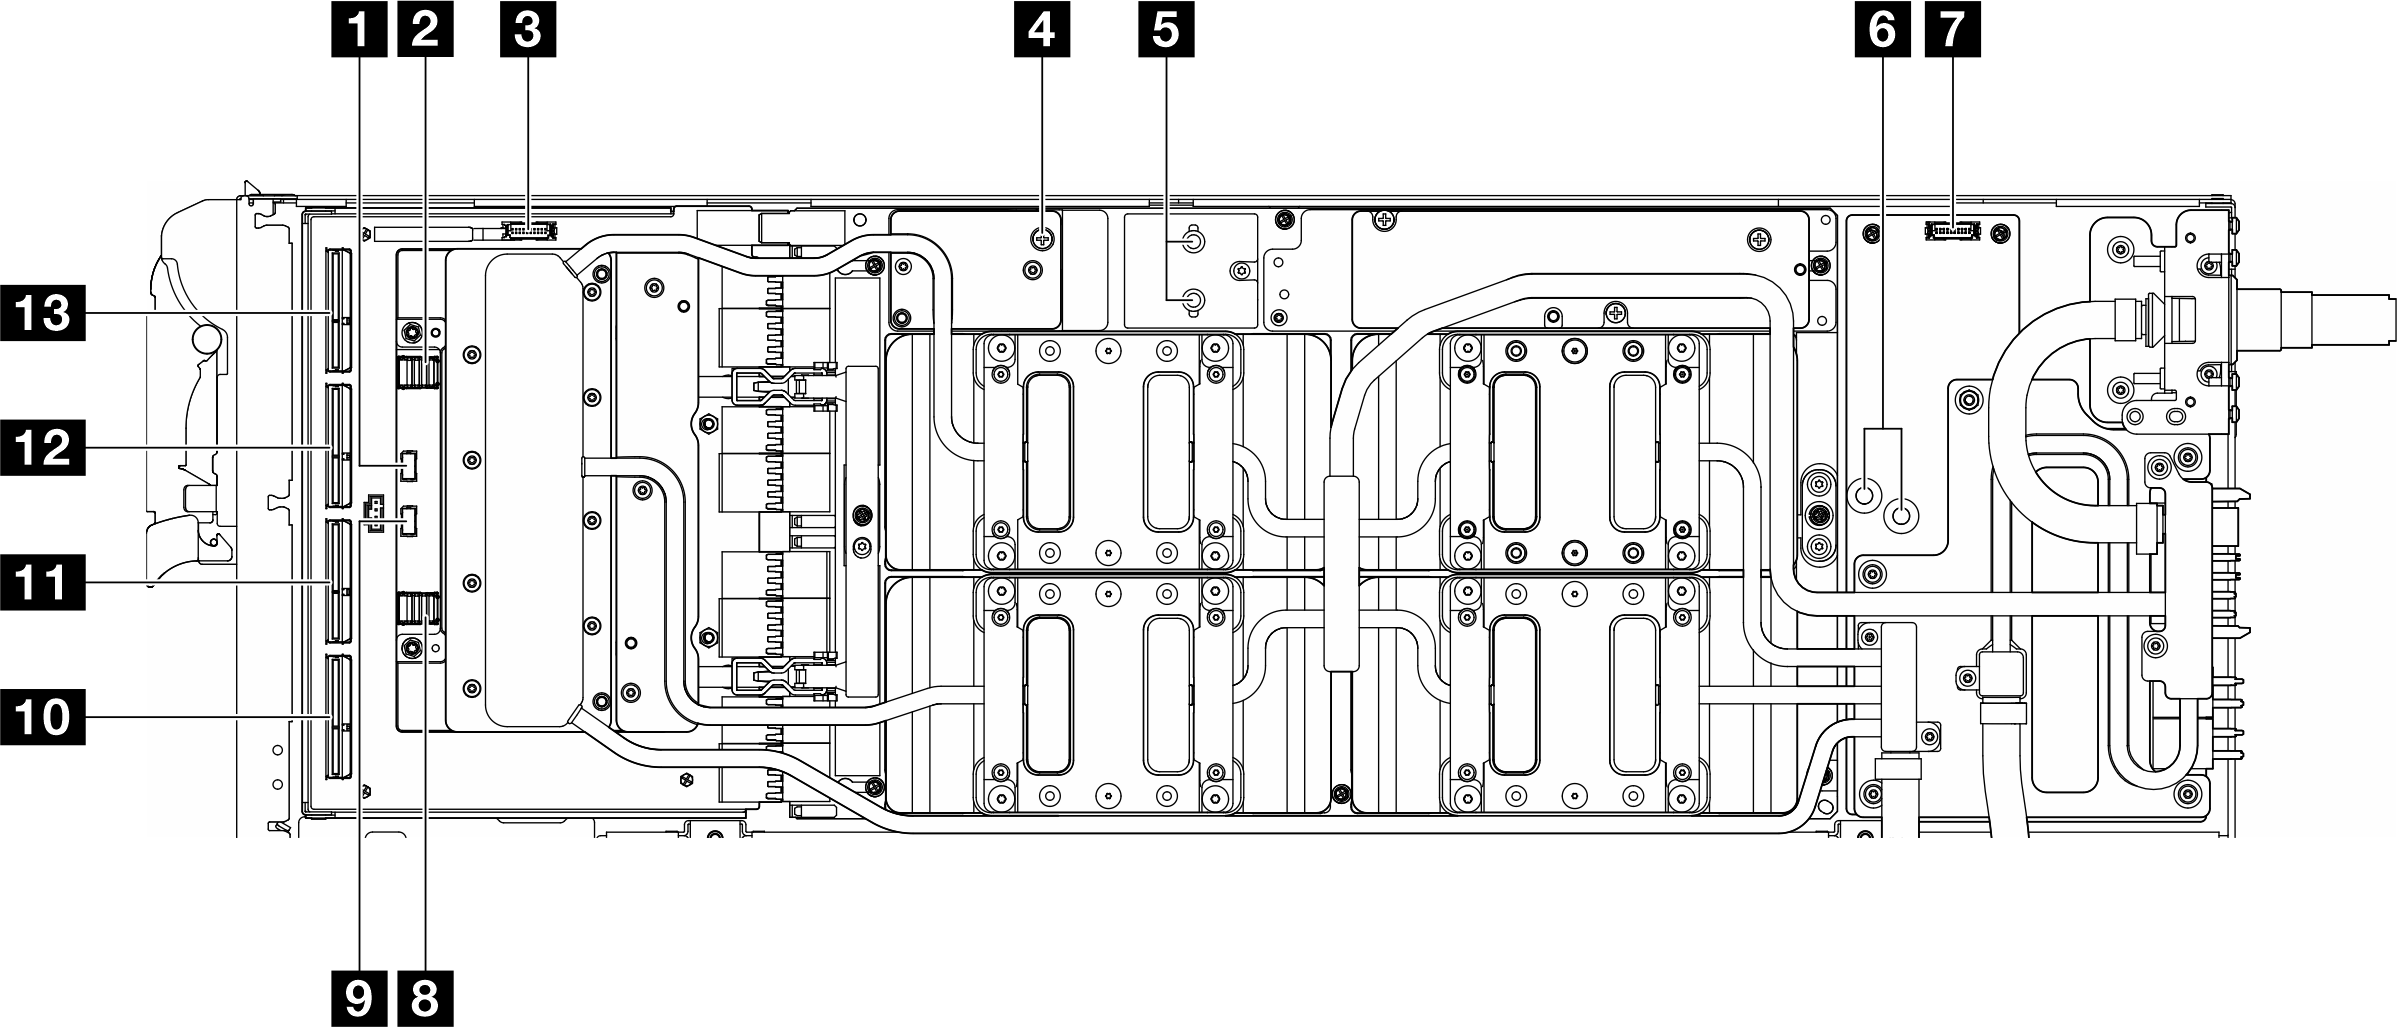 Internal connectors on compute node system board